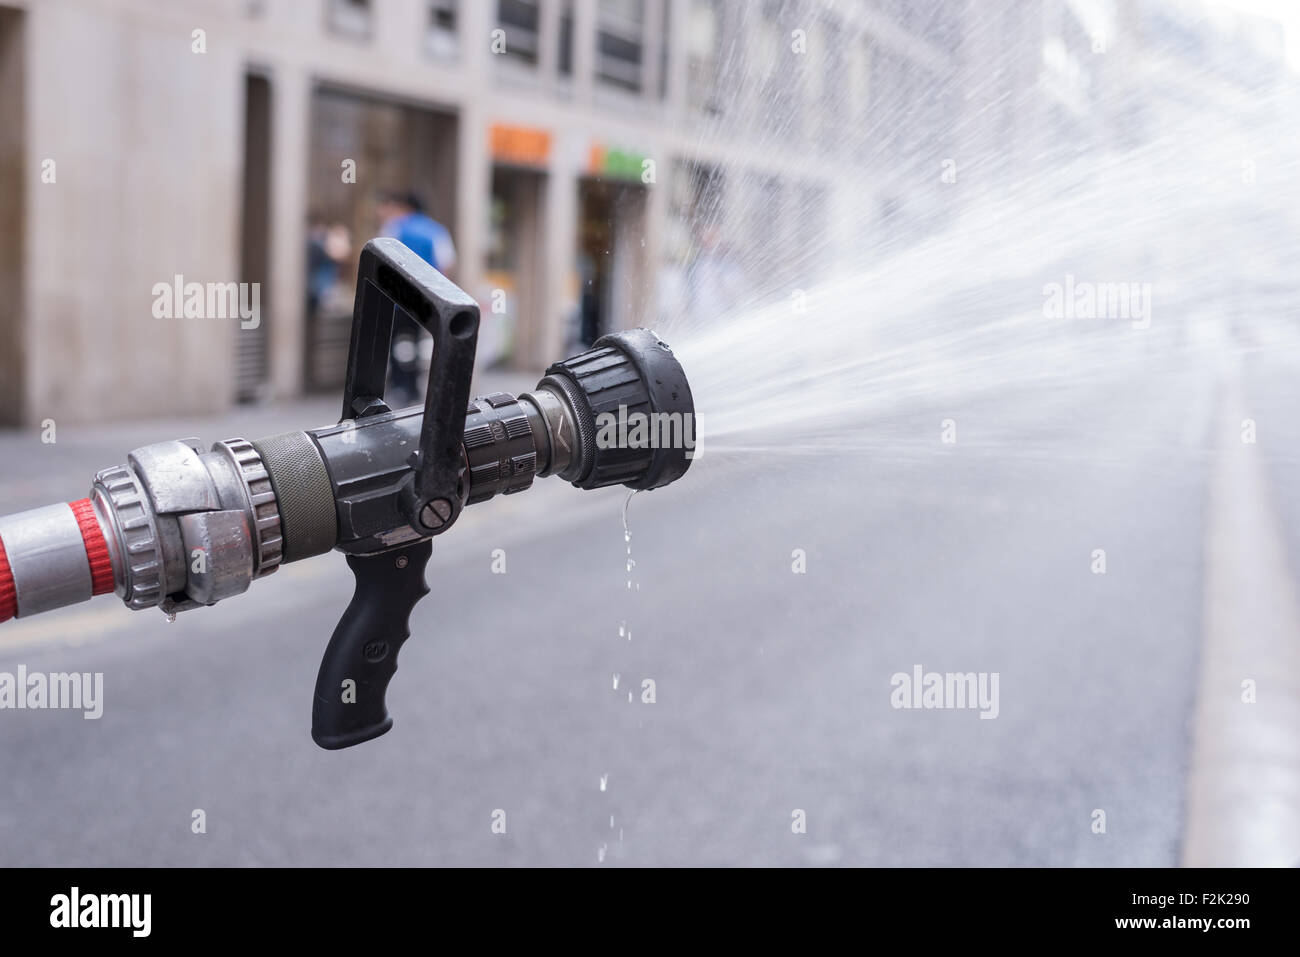 Water jet splashing from a fire fighting firehose nozzle Stock Photo